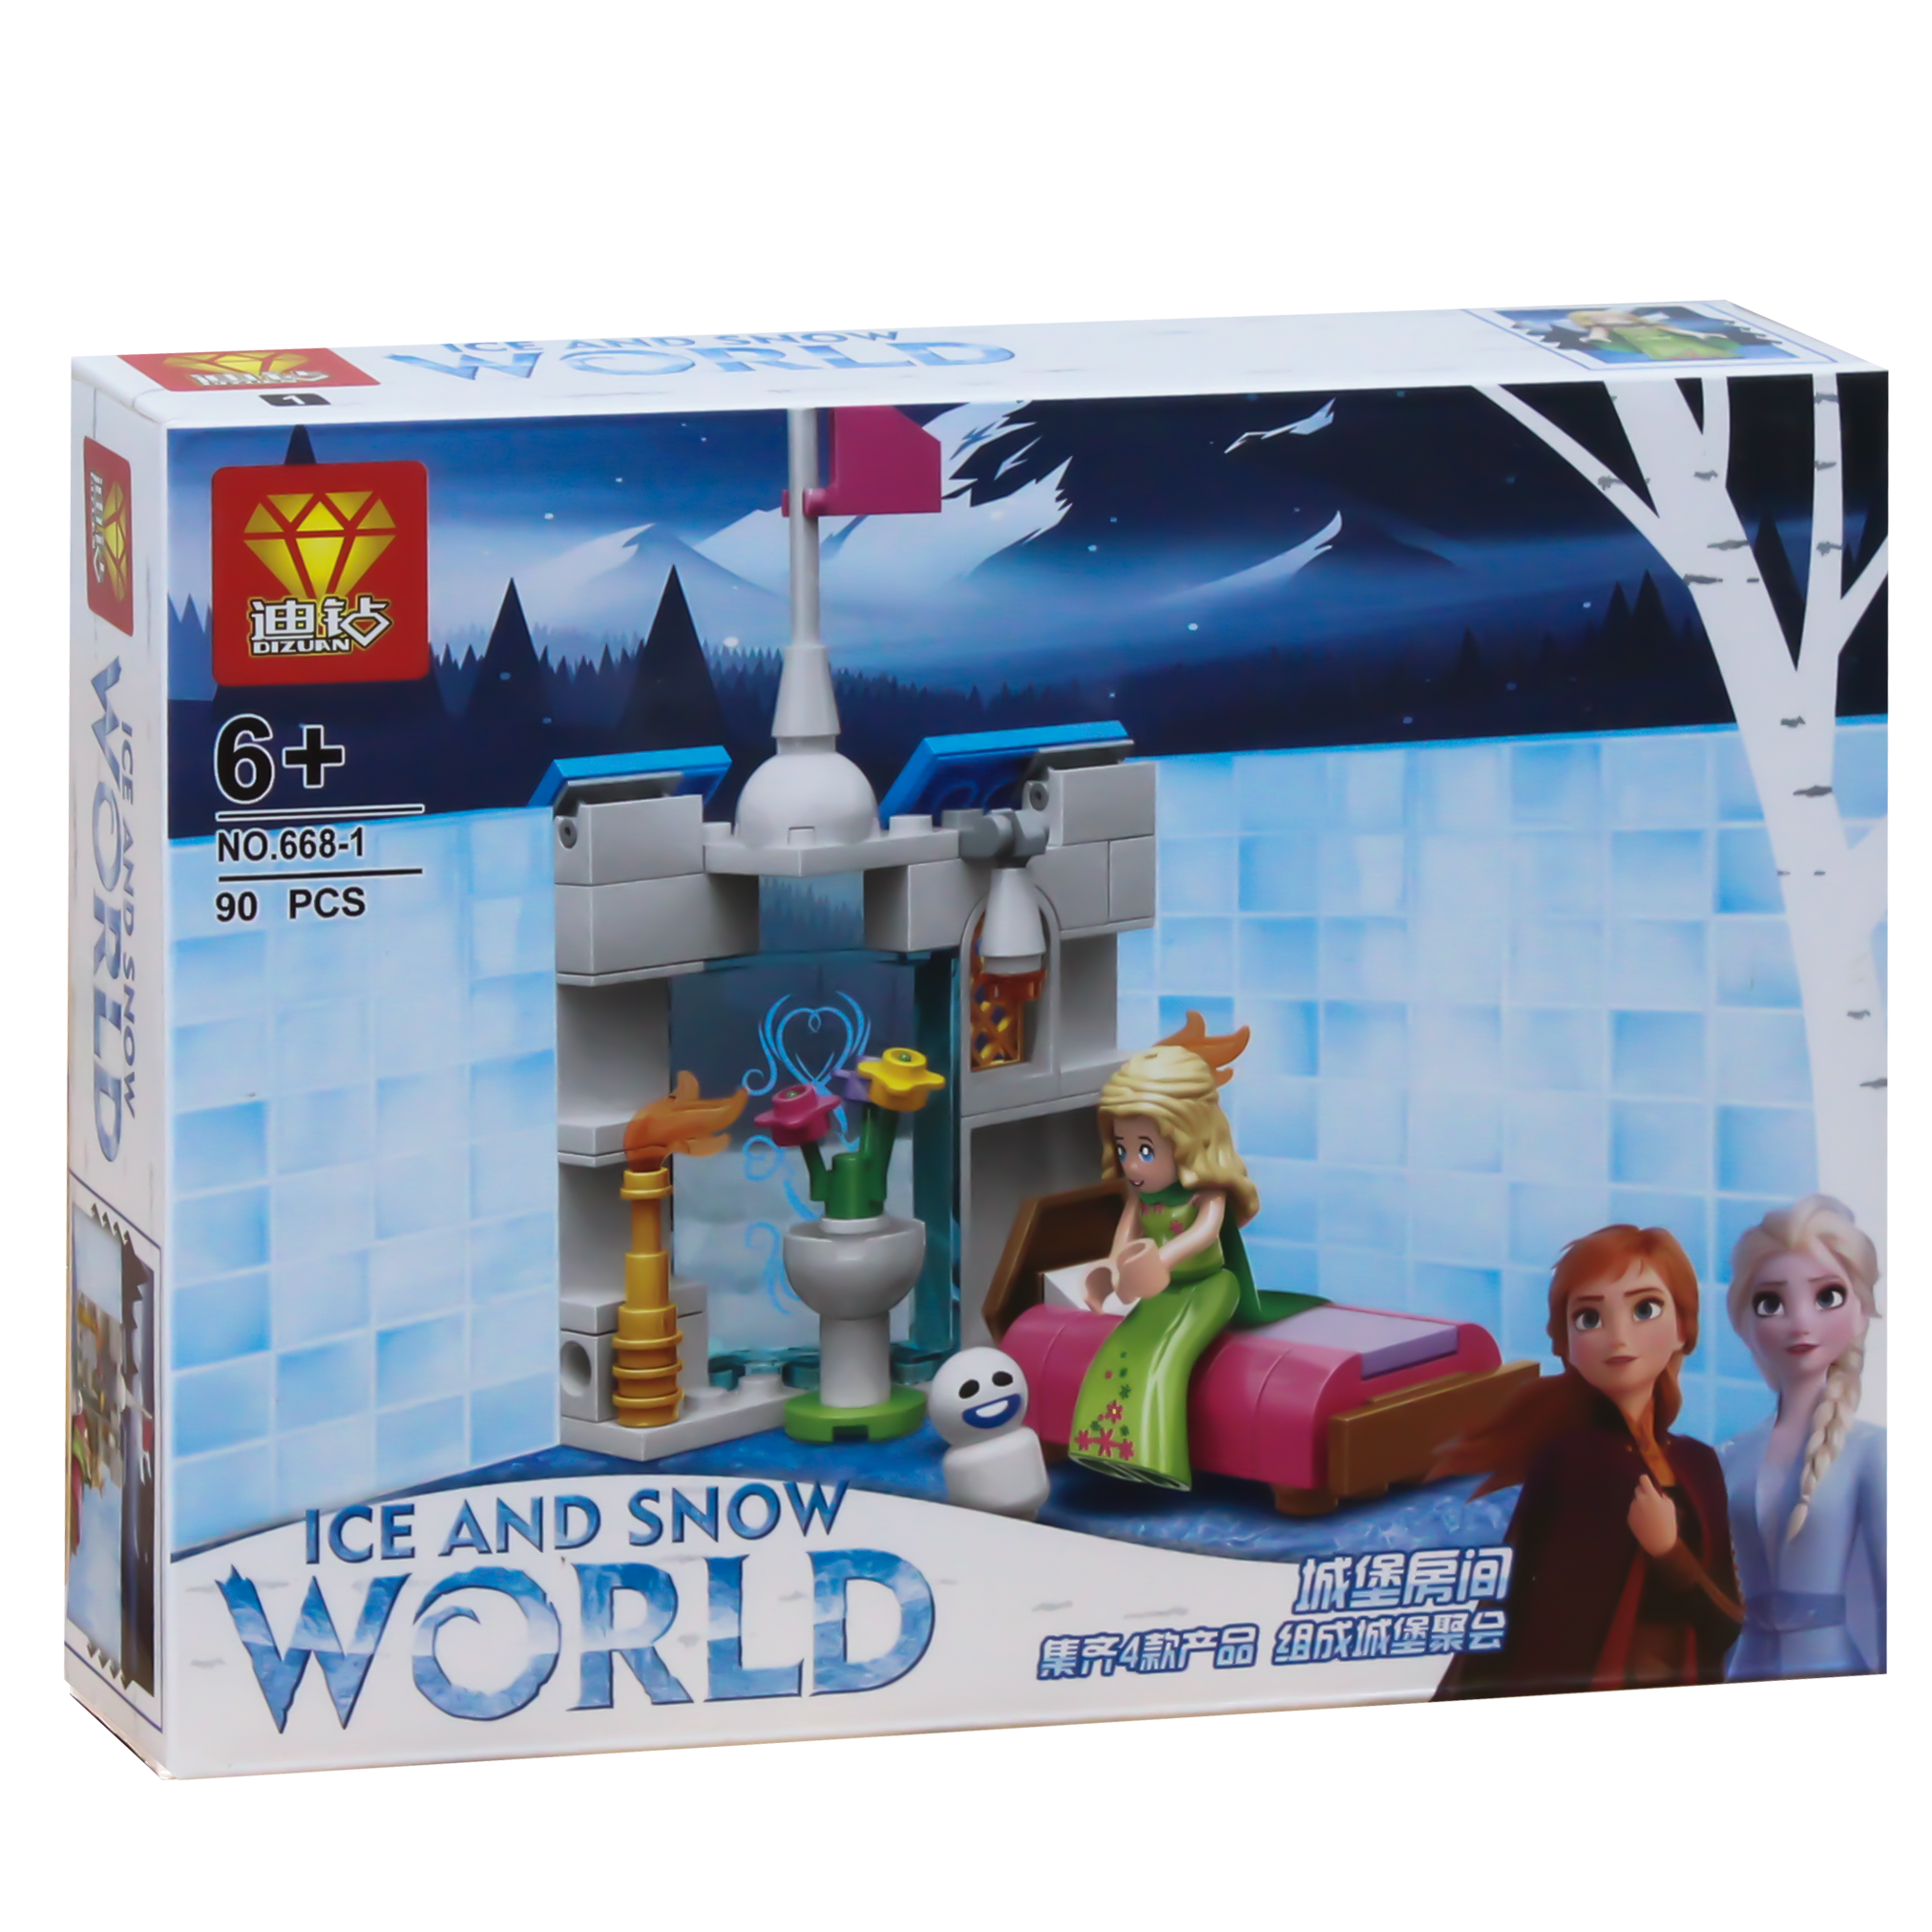 Frozen Princess Ice And Snow World Building Blocks 90 Pieces - 668-1